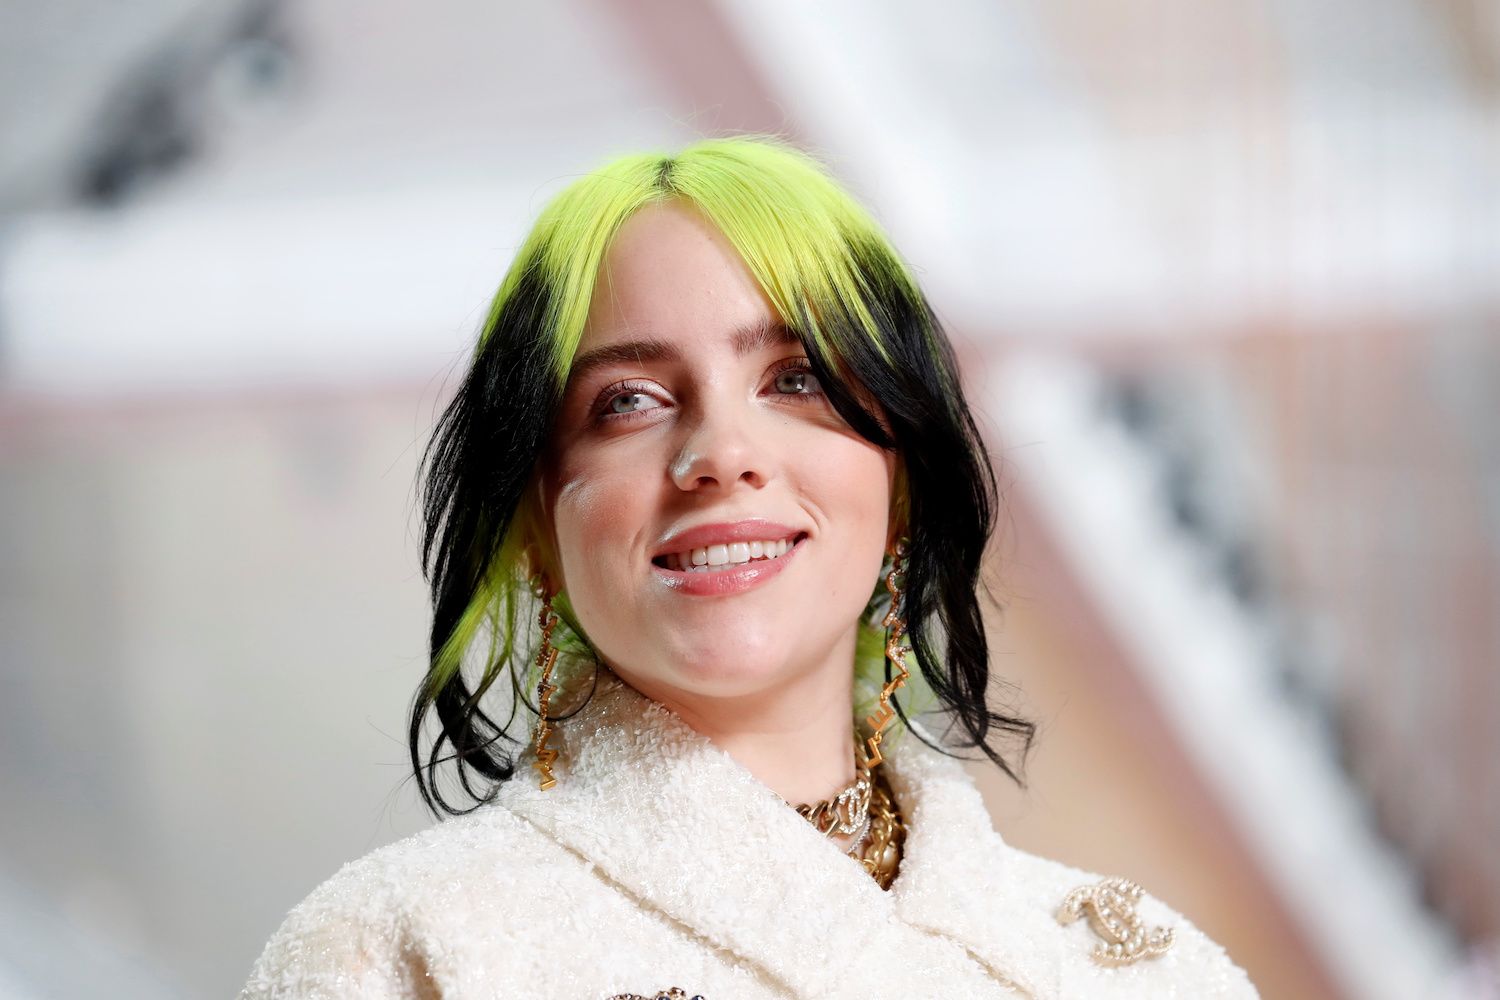 Billie Eilish in Chanel during the Oscars arrivals at the 92nd Academy Awards in Hollywood, Los Angeles, California, U.S., February 9, 2020. (REUTERS: Mike Blake)